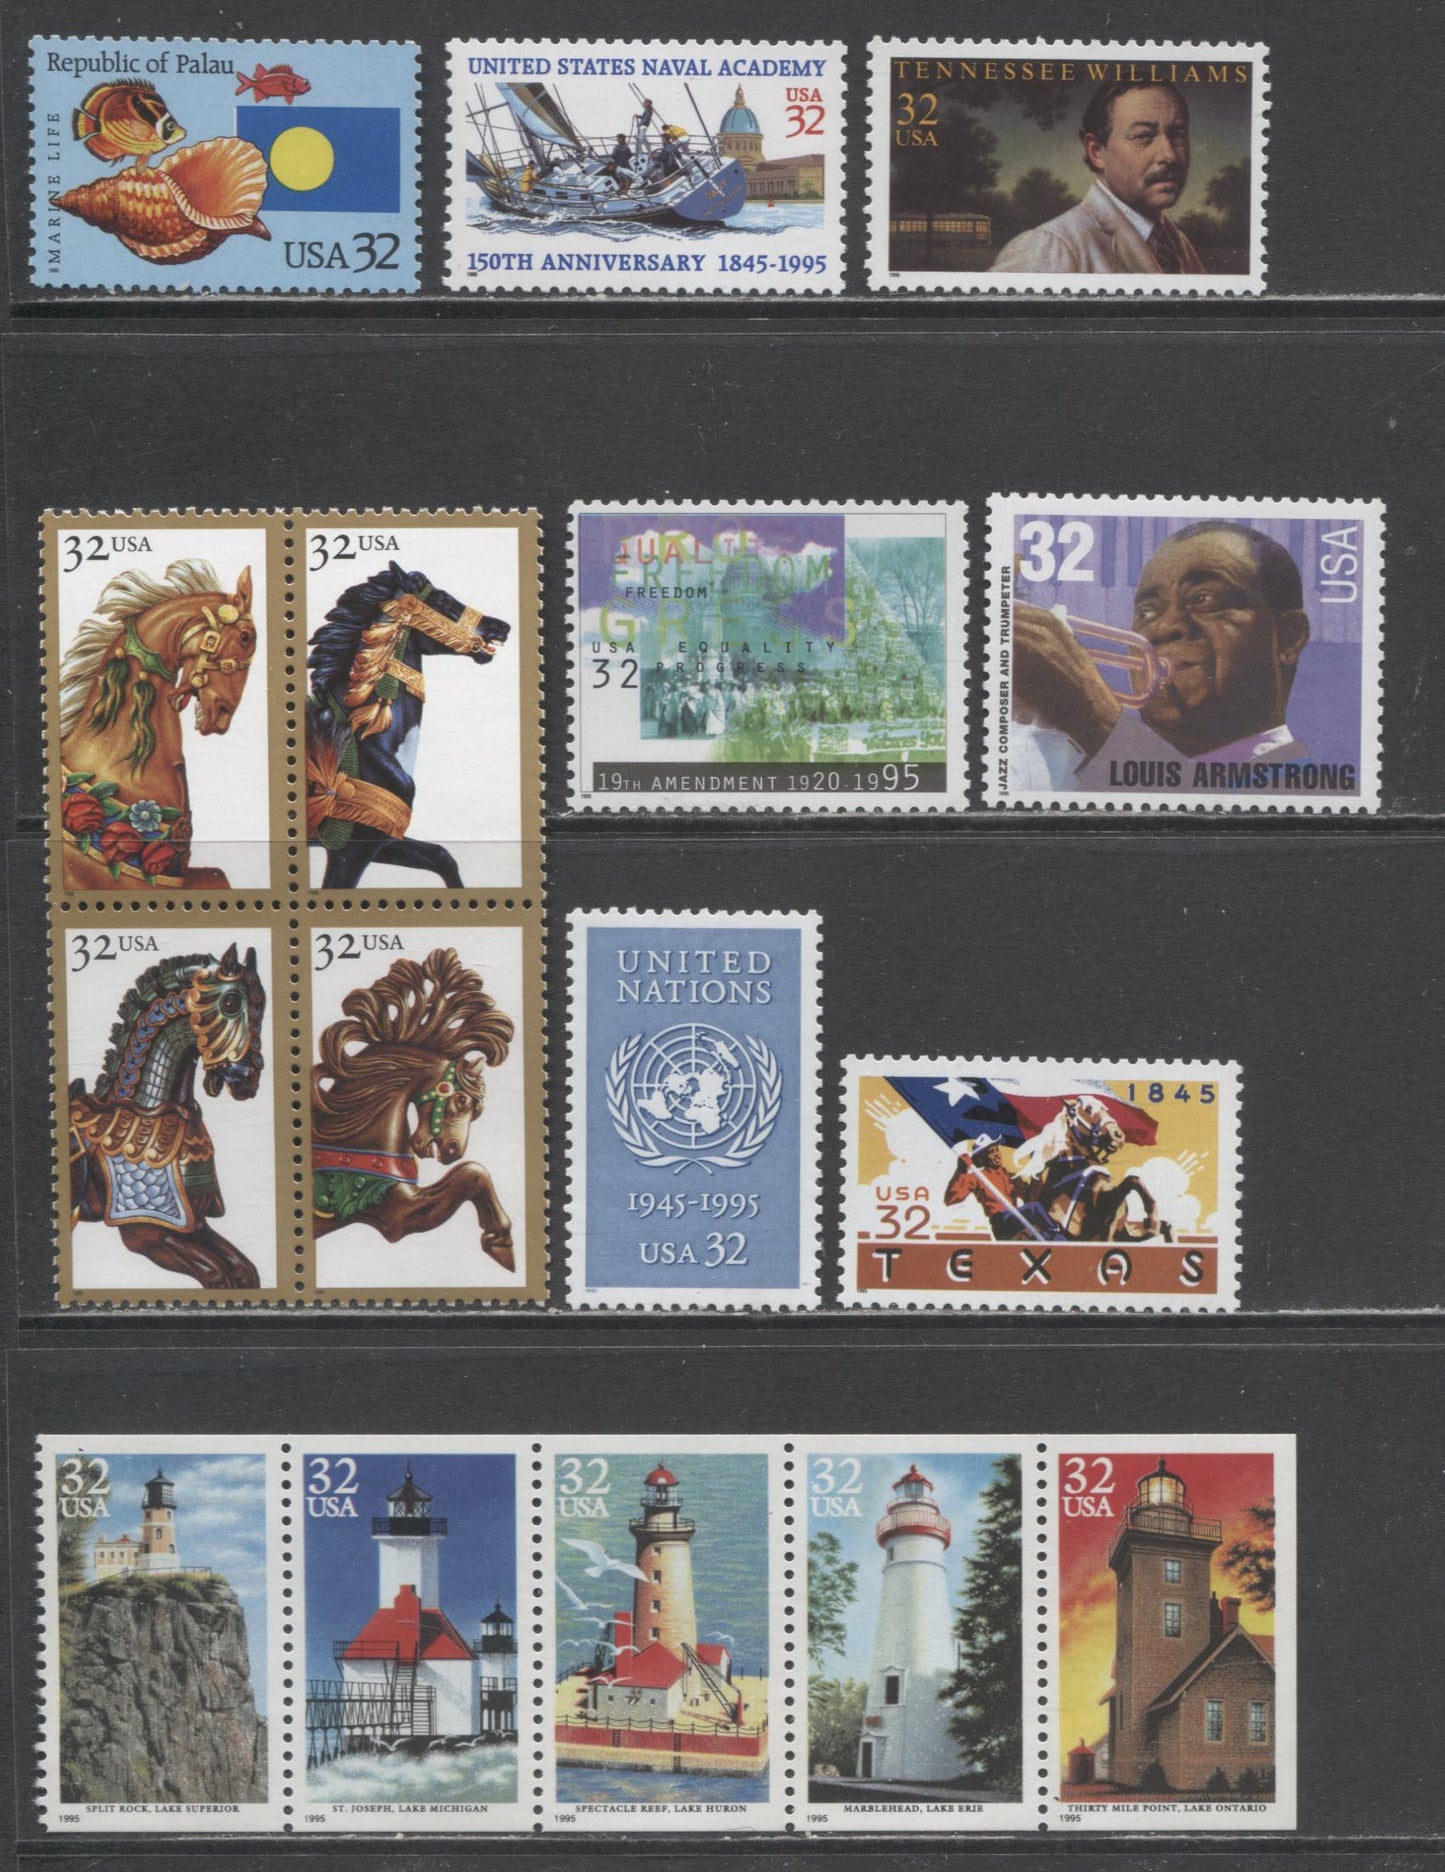 Lot 60 United States SC#2968/3002 1995 Texas Statehood, Lighthouses, UN, Carosel Horses, Womens Suffrage, Music, Palau & US Naval Admiral Williams Issues, 9 VFNH Singles, Block Of 4 & Strip Of 5, 2017 Scott Cat. $12.45